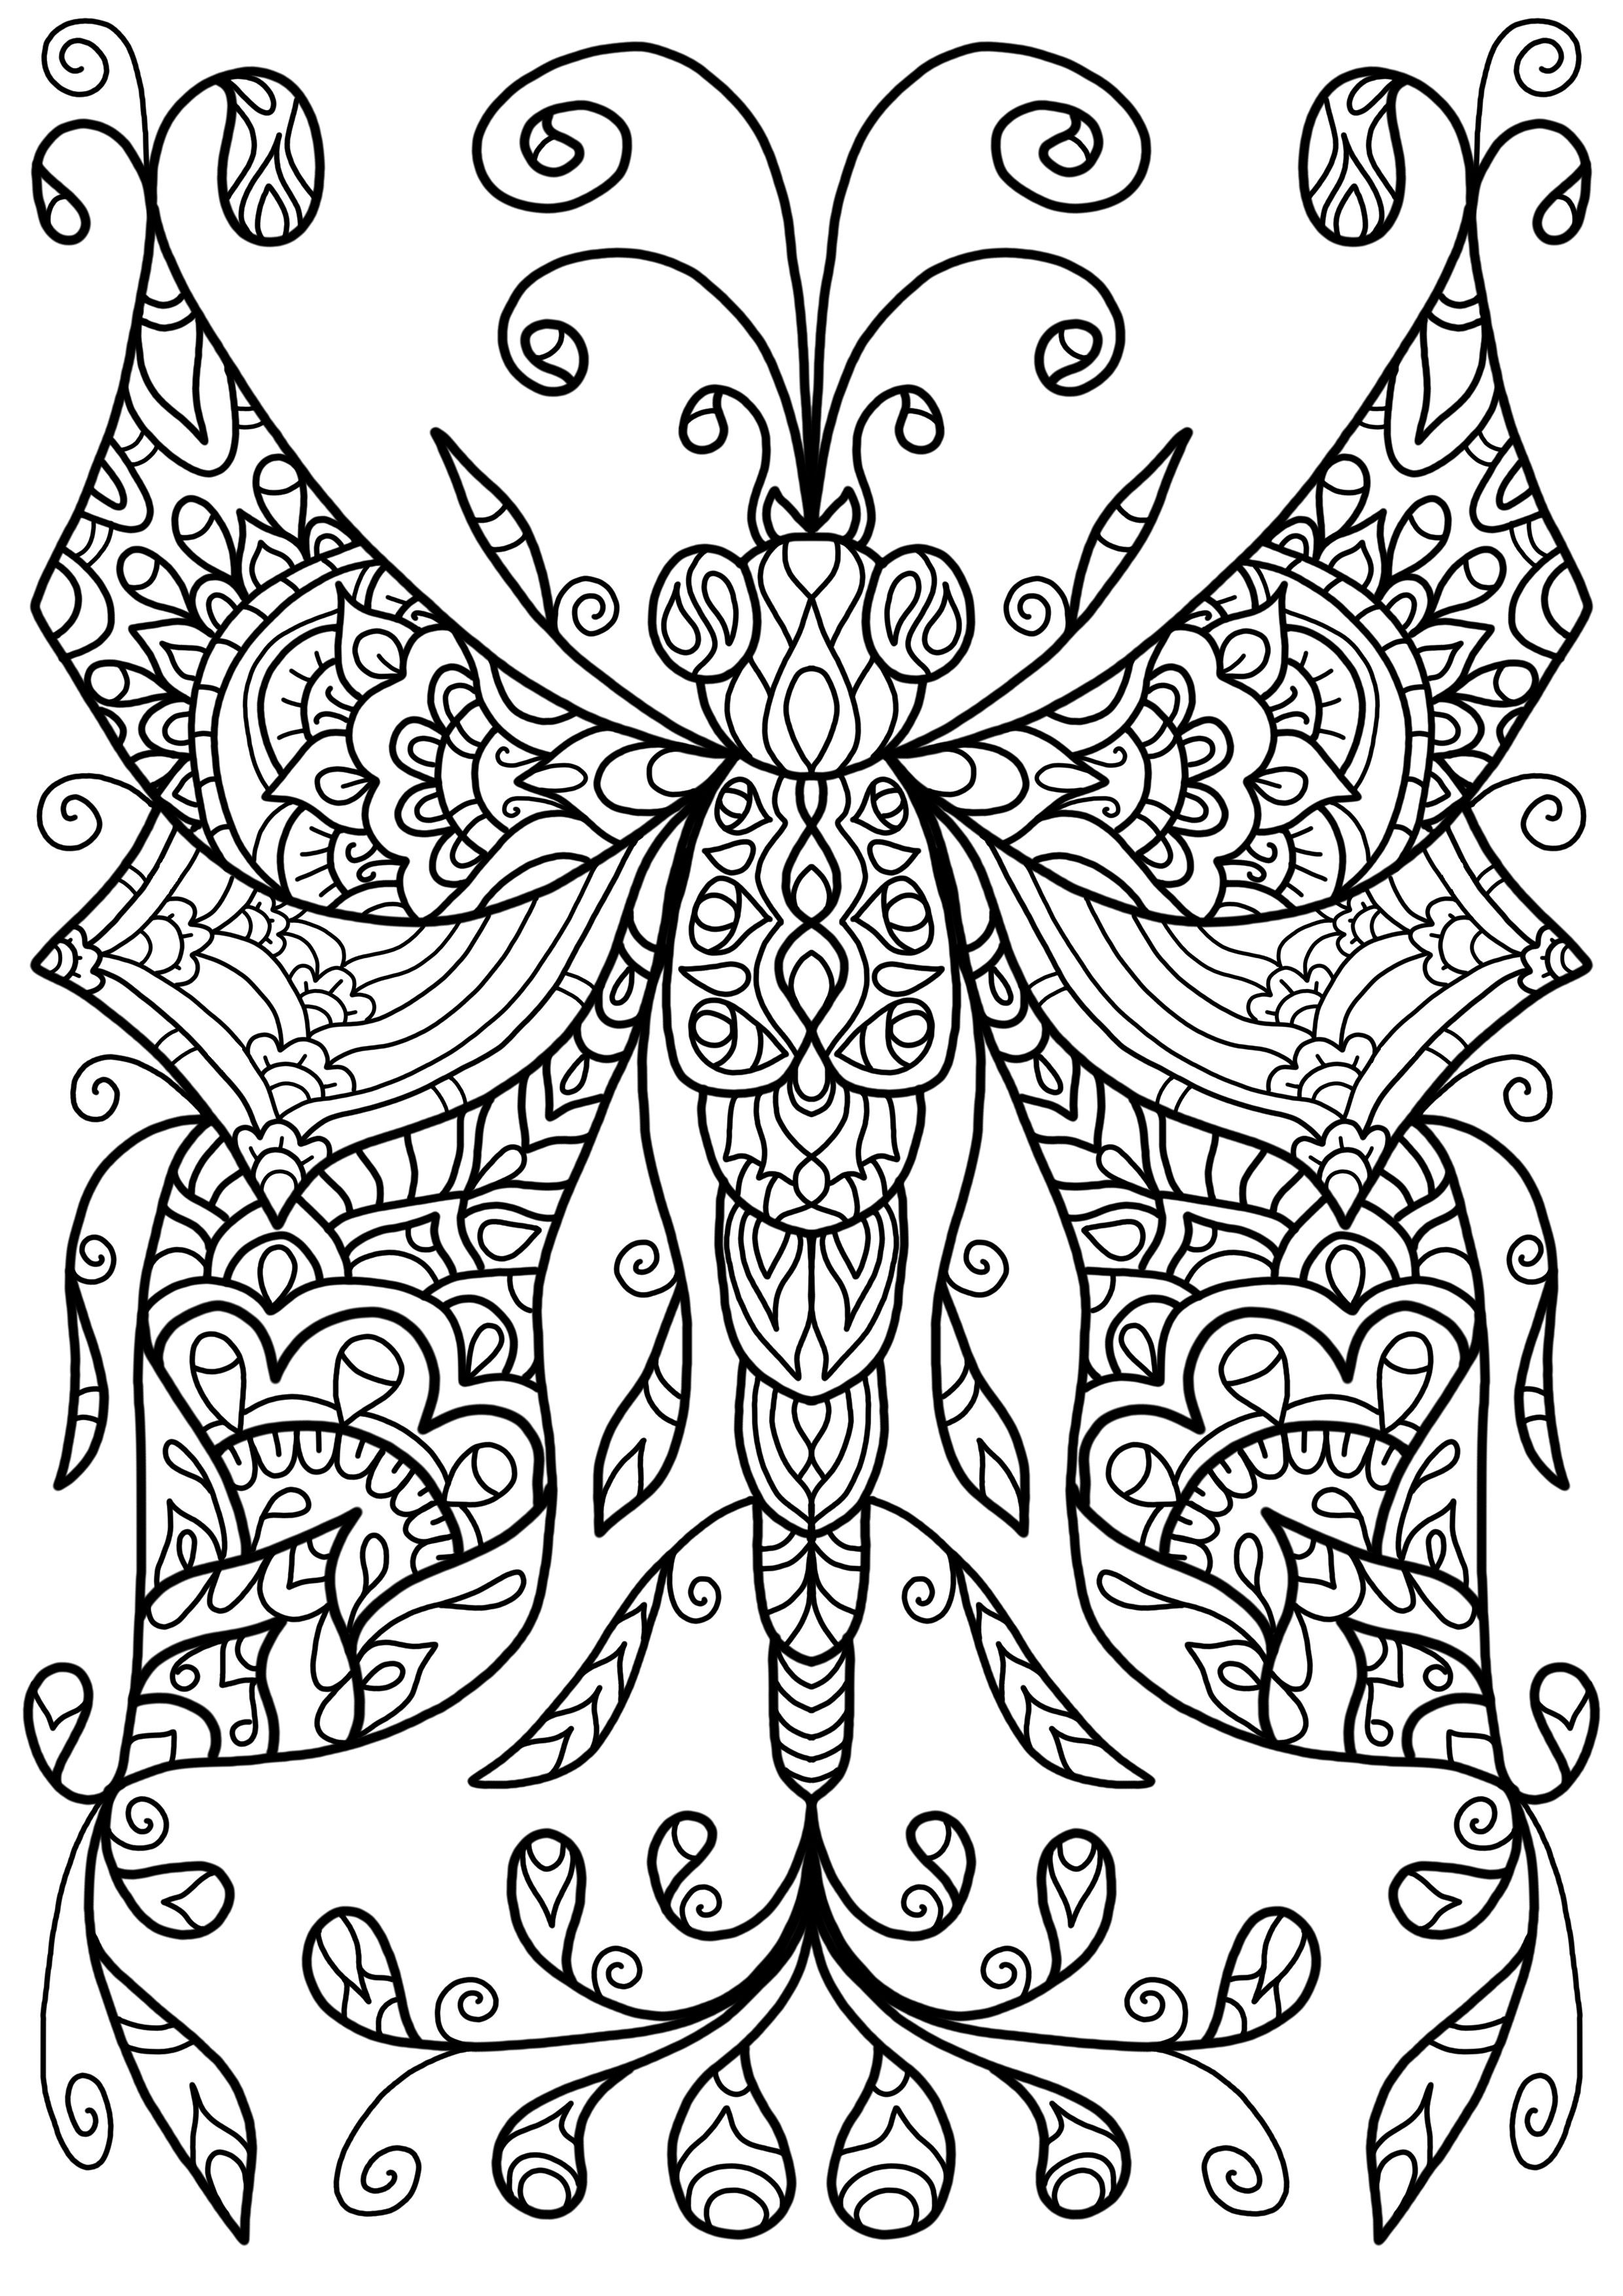 Coloring Book Free Download
 Coloring Pages for Dementia Patients Download